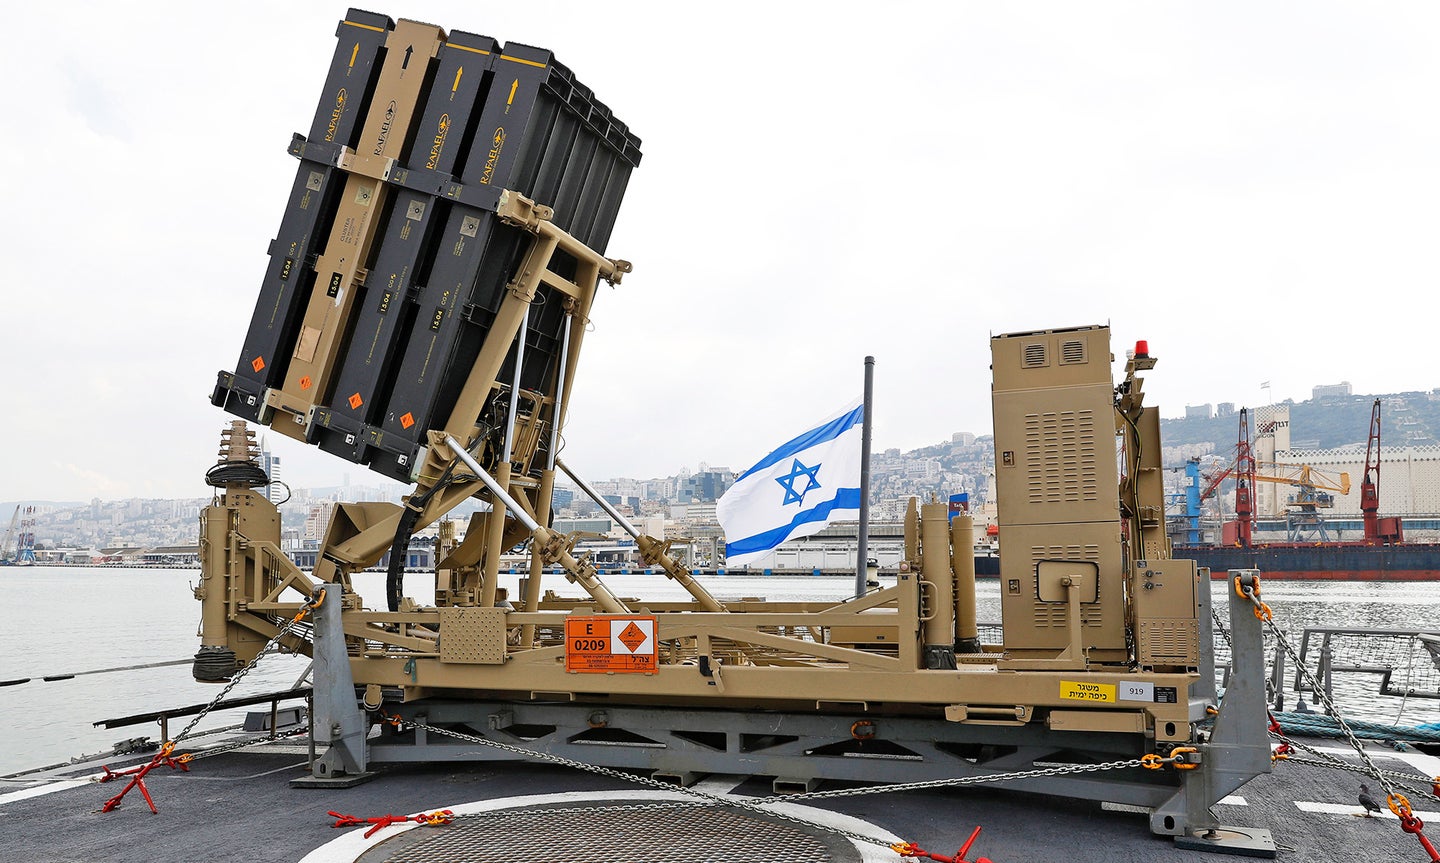 Israeli Corvette Emerges With A Double Load Of Iron Dome Missiles As Potential Threats Grow